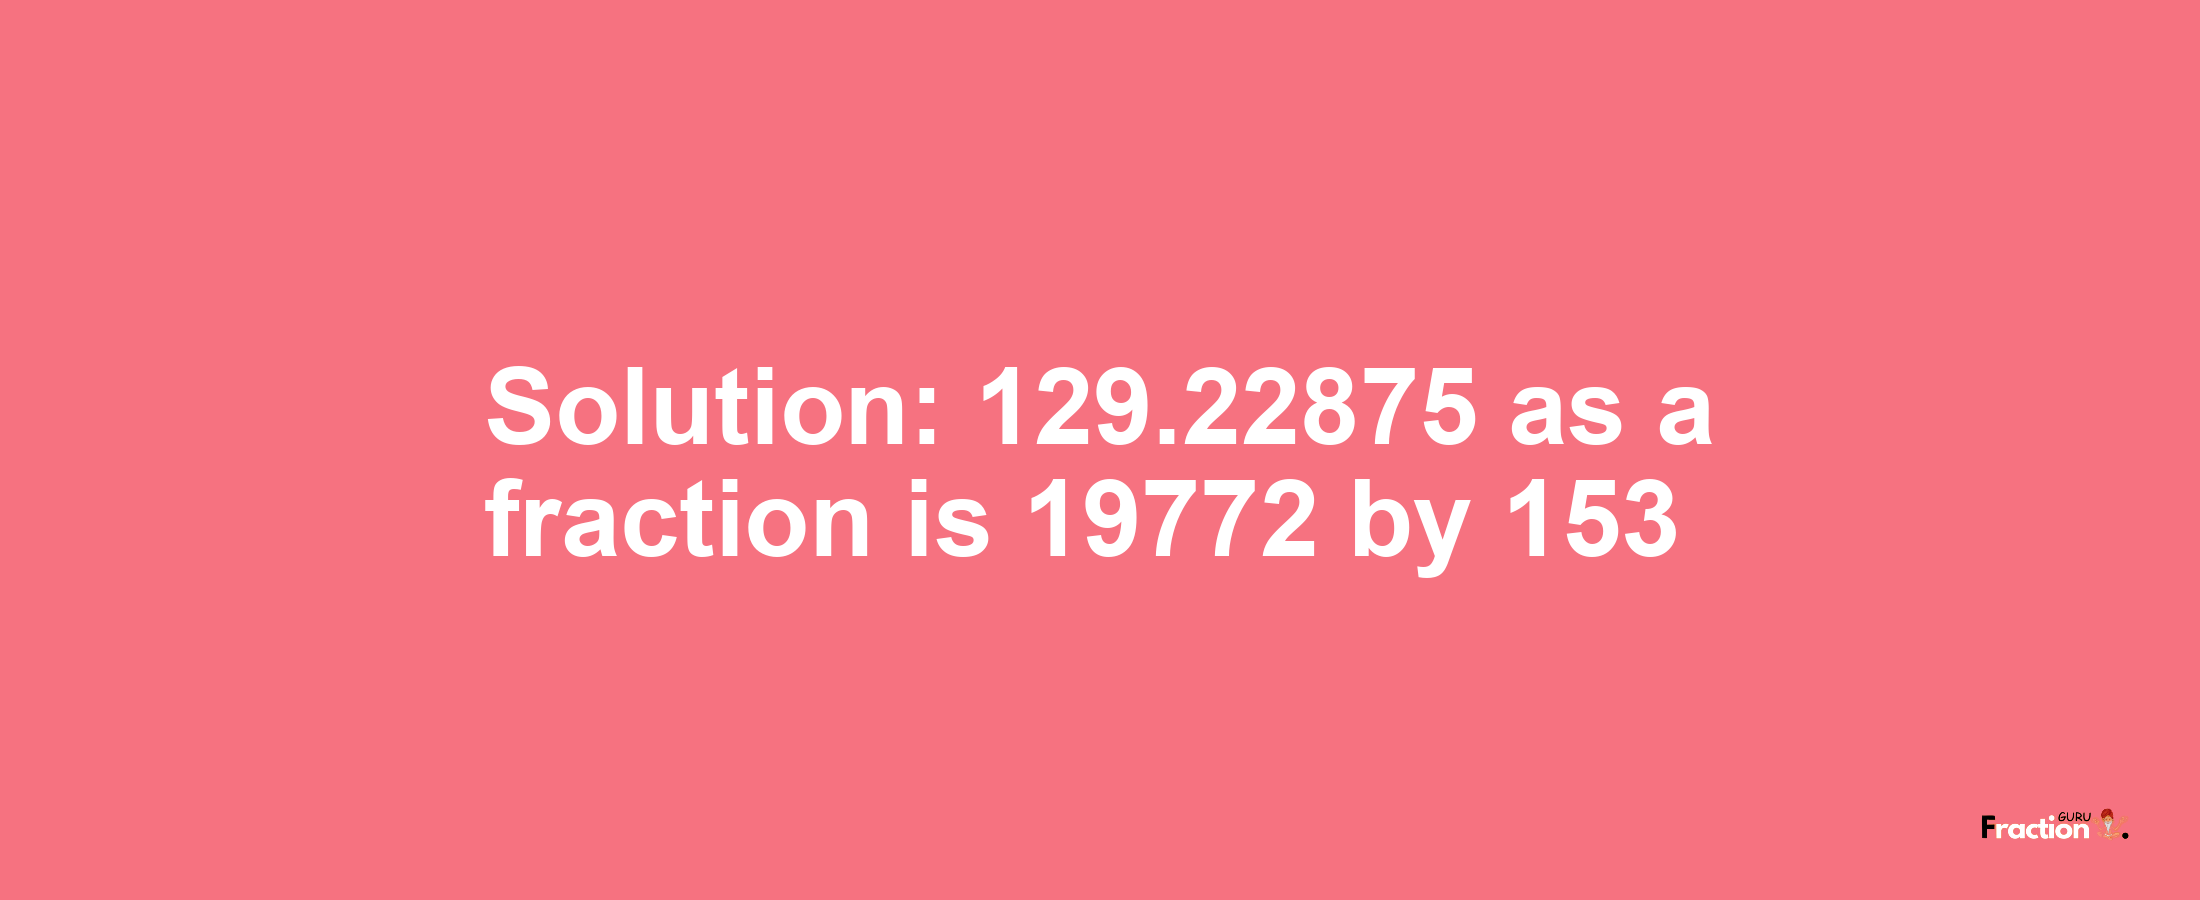 Solution:129.22875 as a fraction is 19772/153